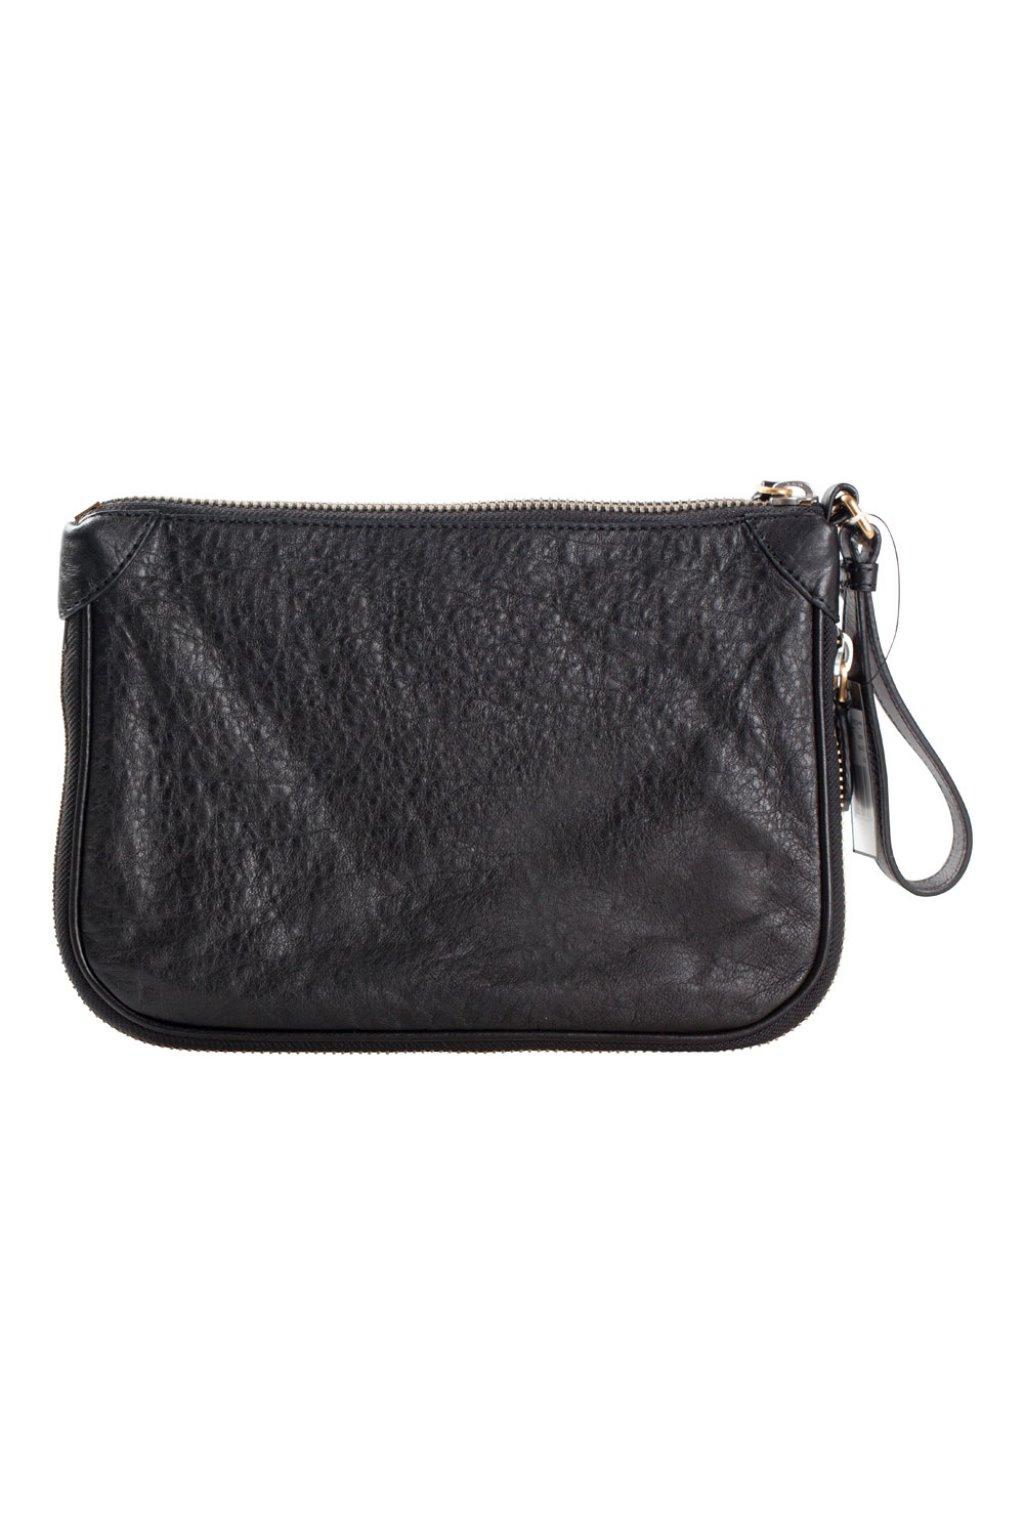 This clutch from Marc by Marc Jacobs will be a great accessory to keep your little items. It has been crafted from black leather and features spacious compartments lined with fabric and designed to organise your things properly. It comes with a